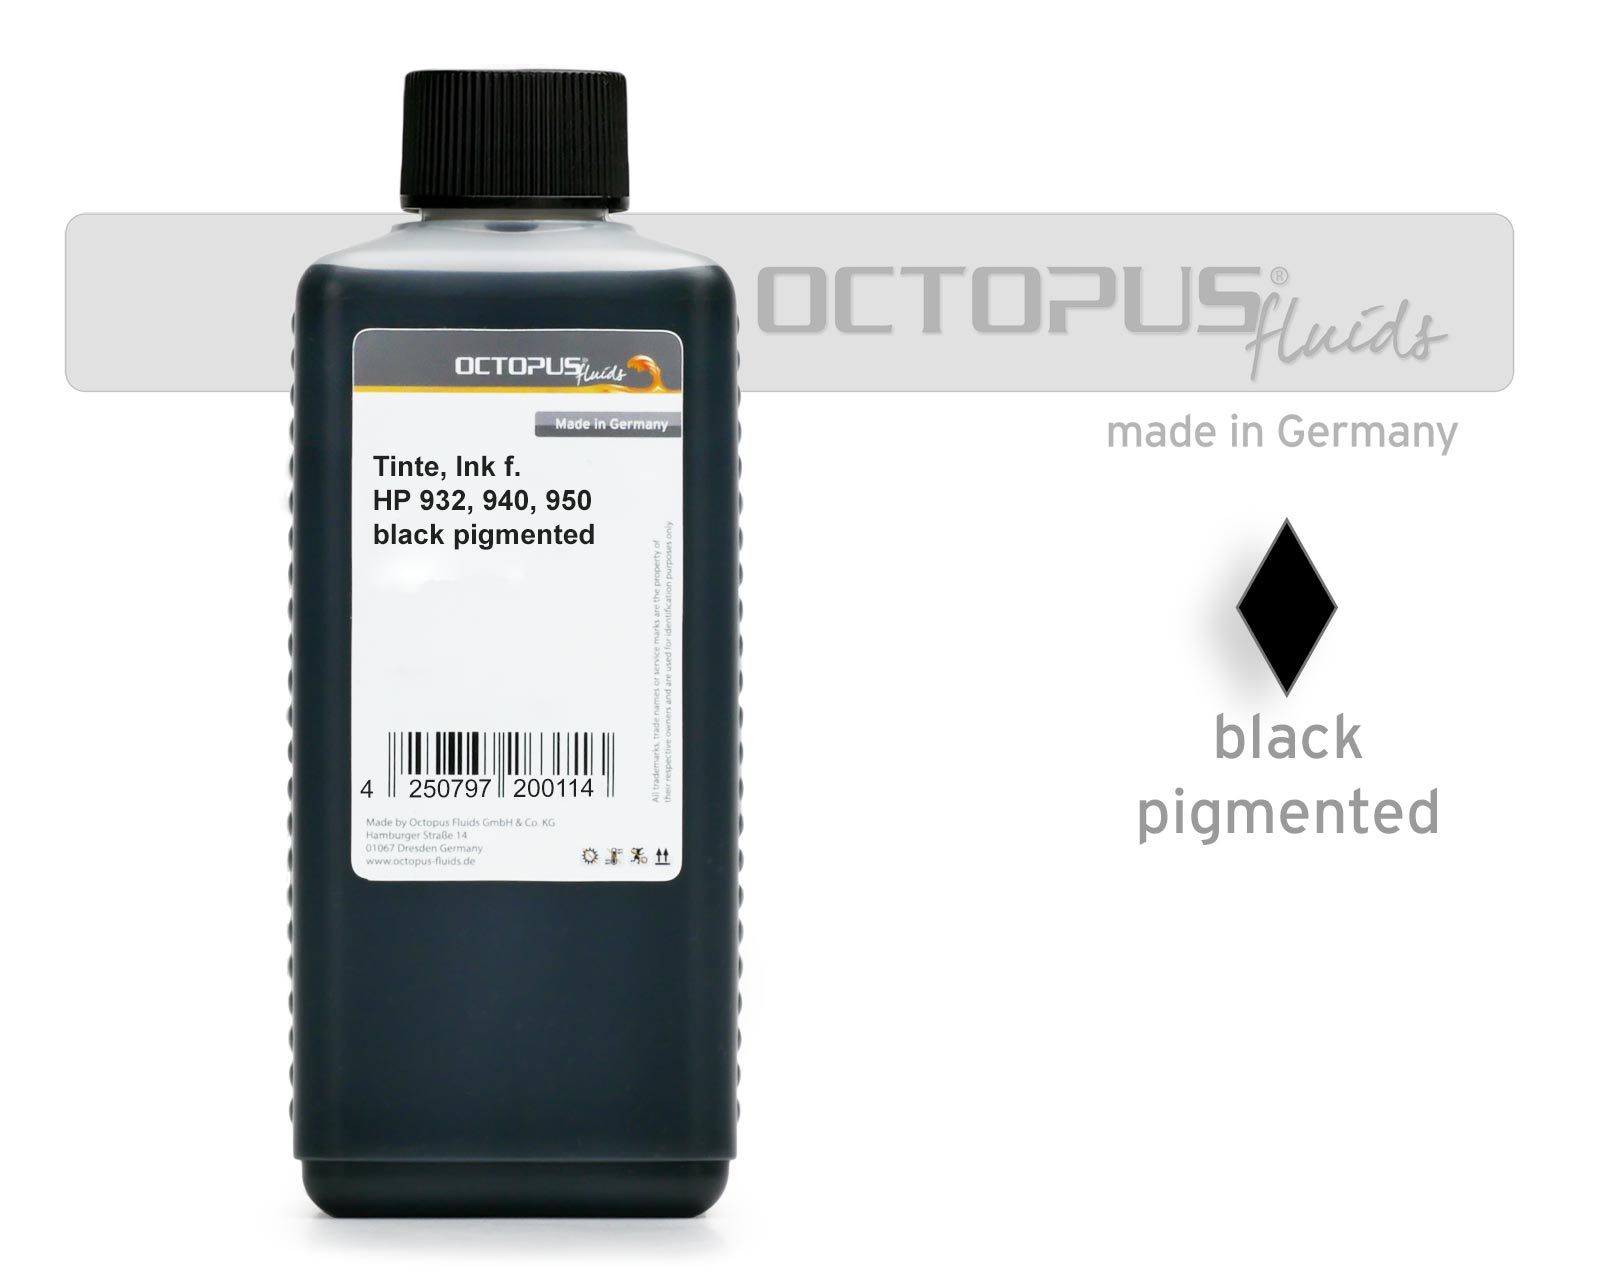 Octopus Refill Ink for HP 932, 940, 950 pigmented black